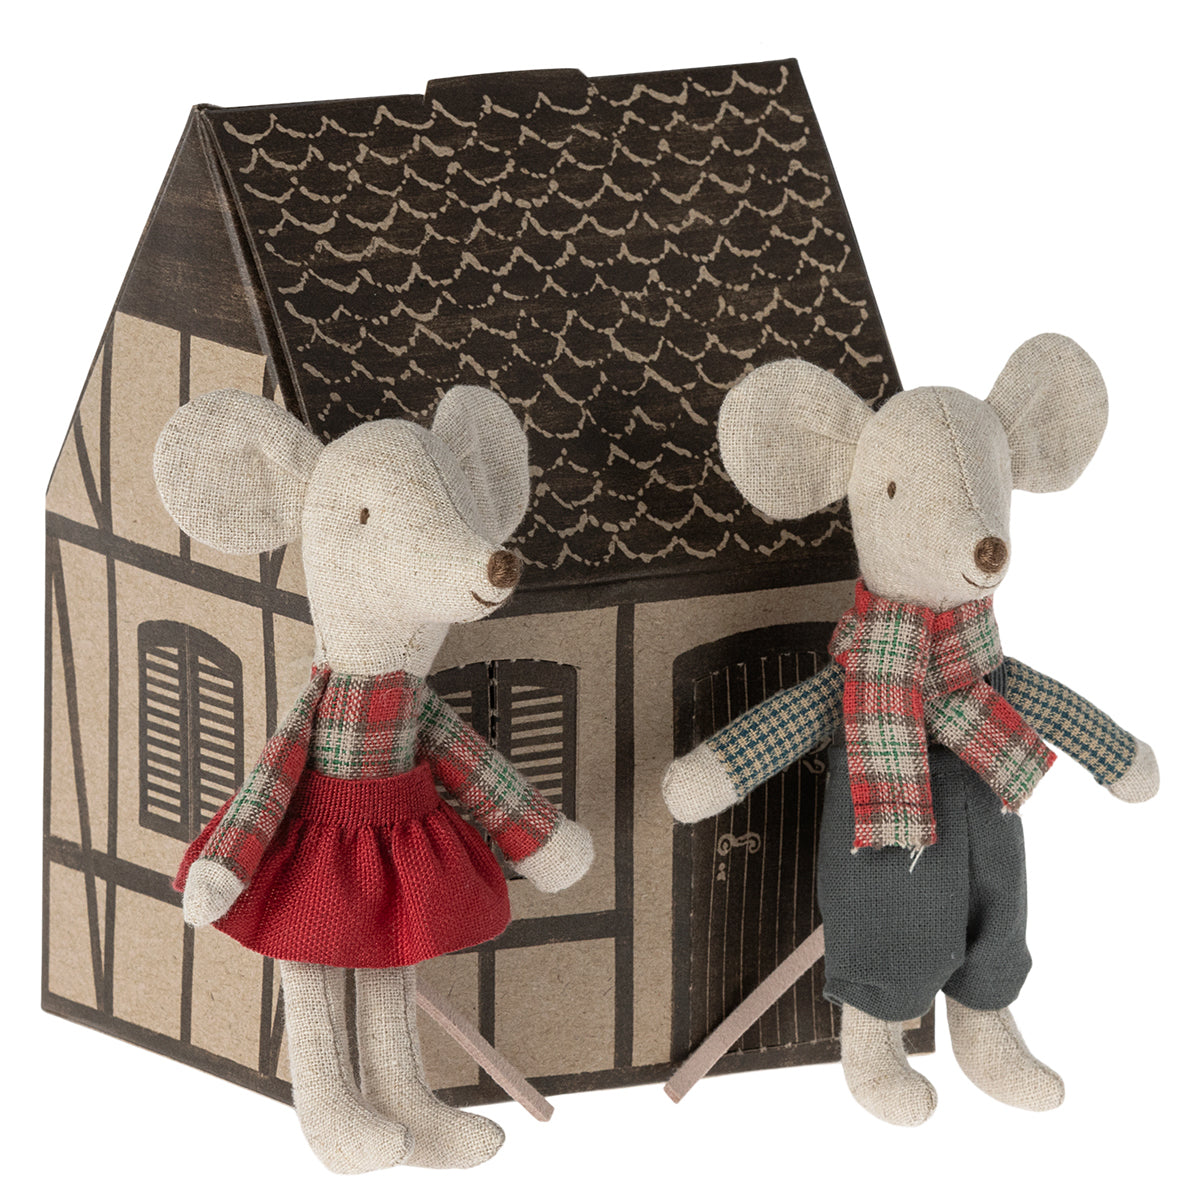 Maileg Winter Mice Twins Little Brother and Sister 17-3103-00